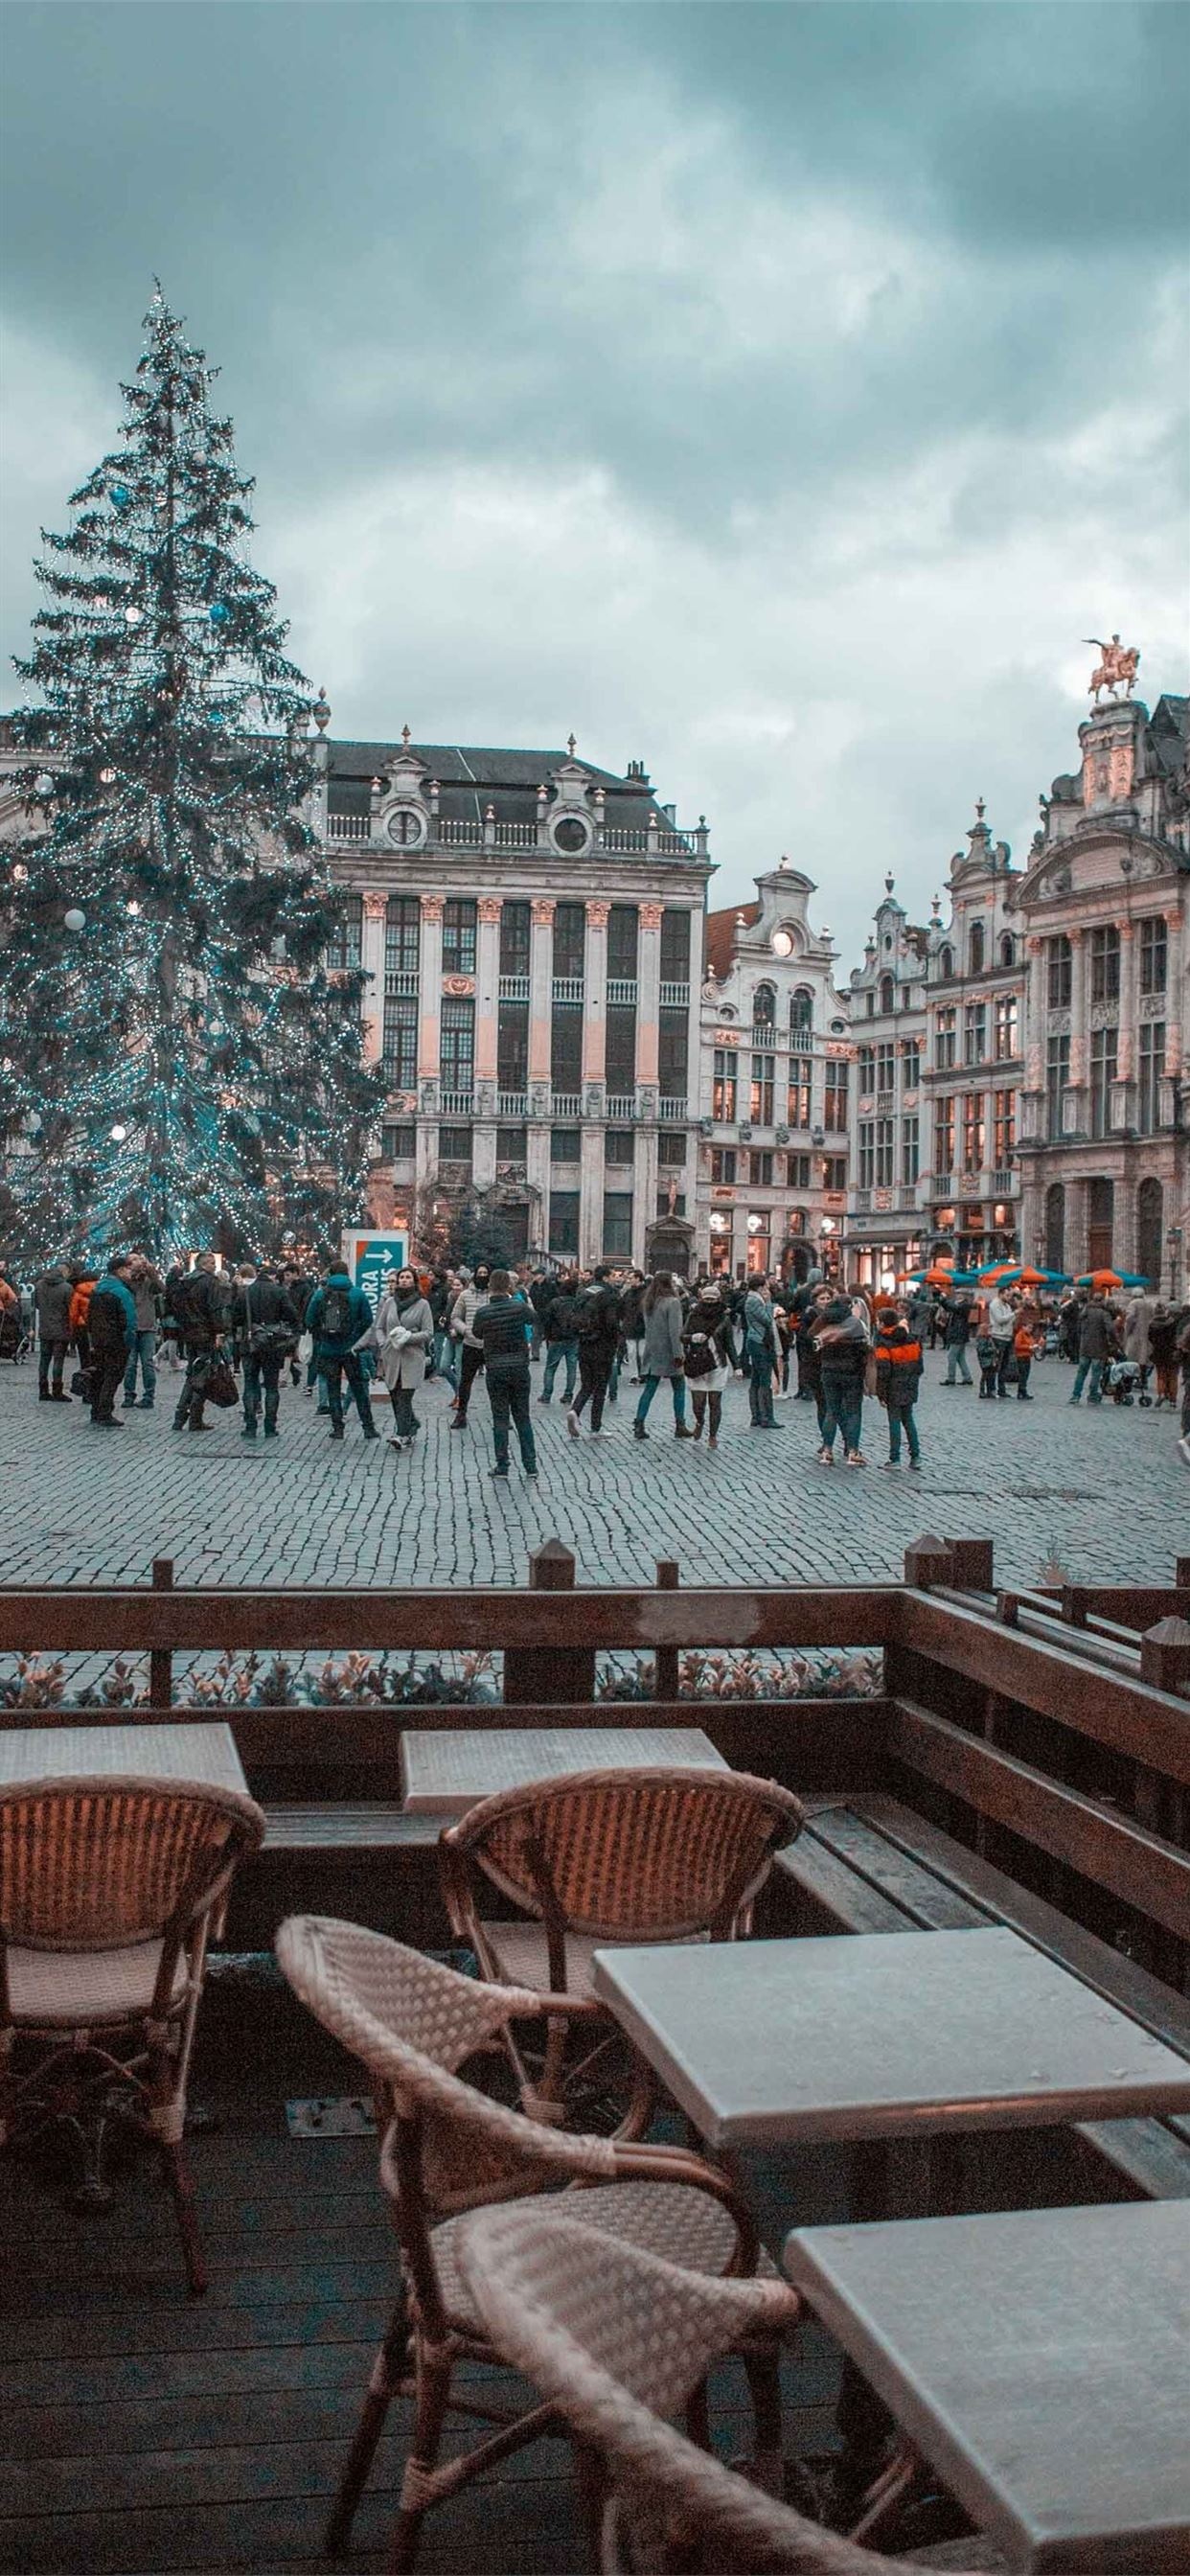 Brussels iPhone wallpapers, HD backgrounds, Free download, Phone personalization, 1250x2690 HD Handy